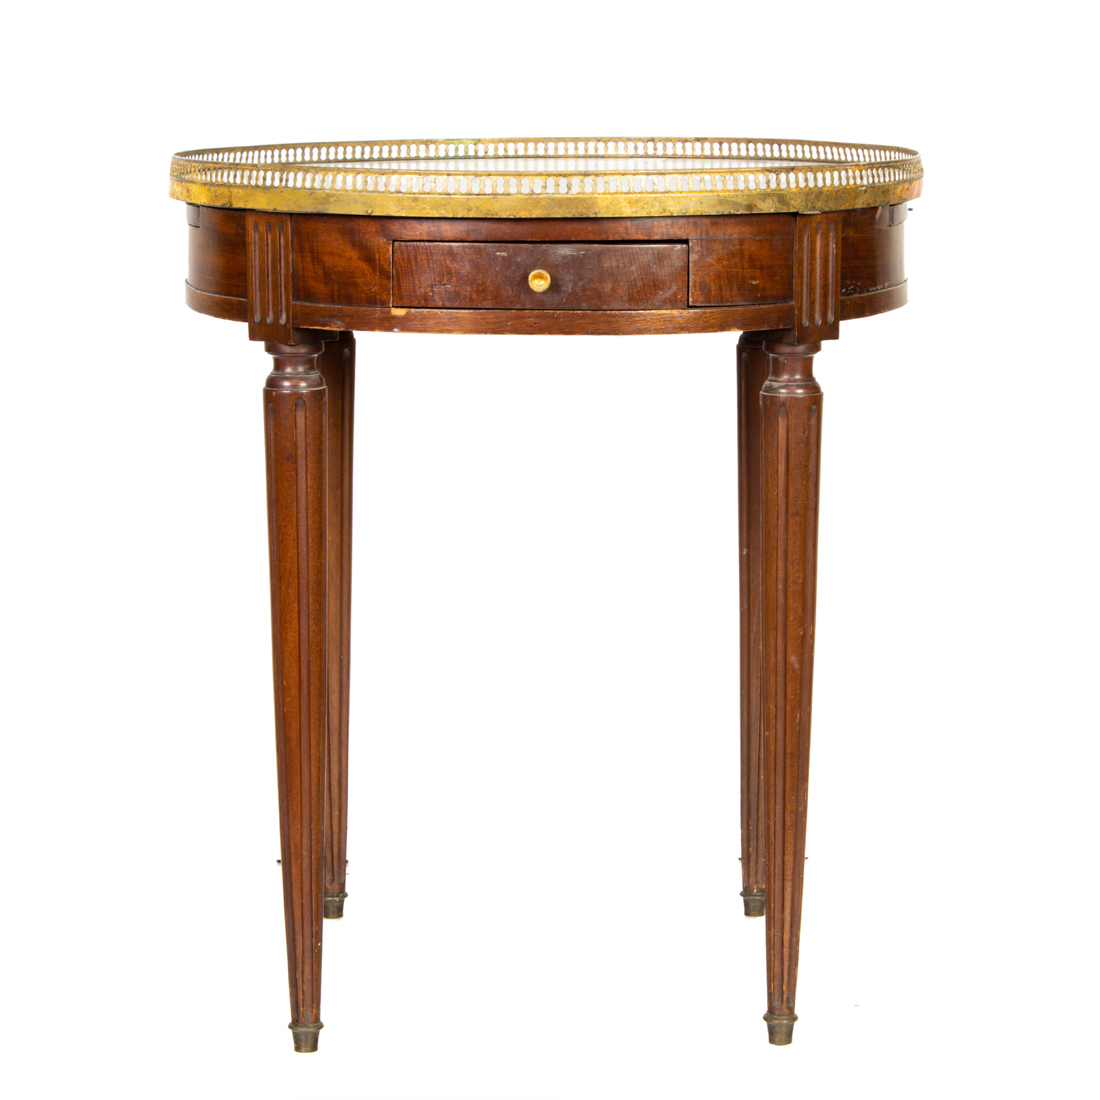 LOUIS XV STYLE MARBLE CENTER TABLE 2d0f77